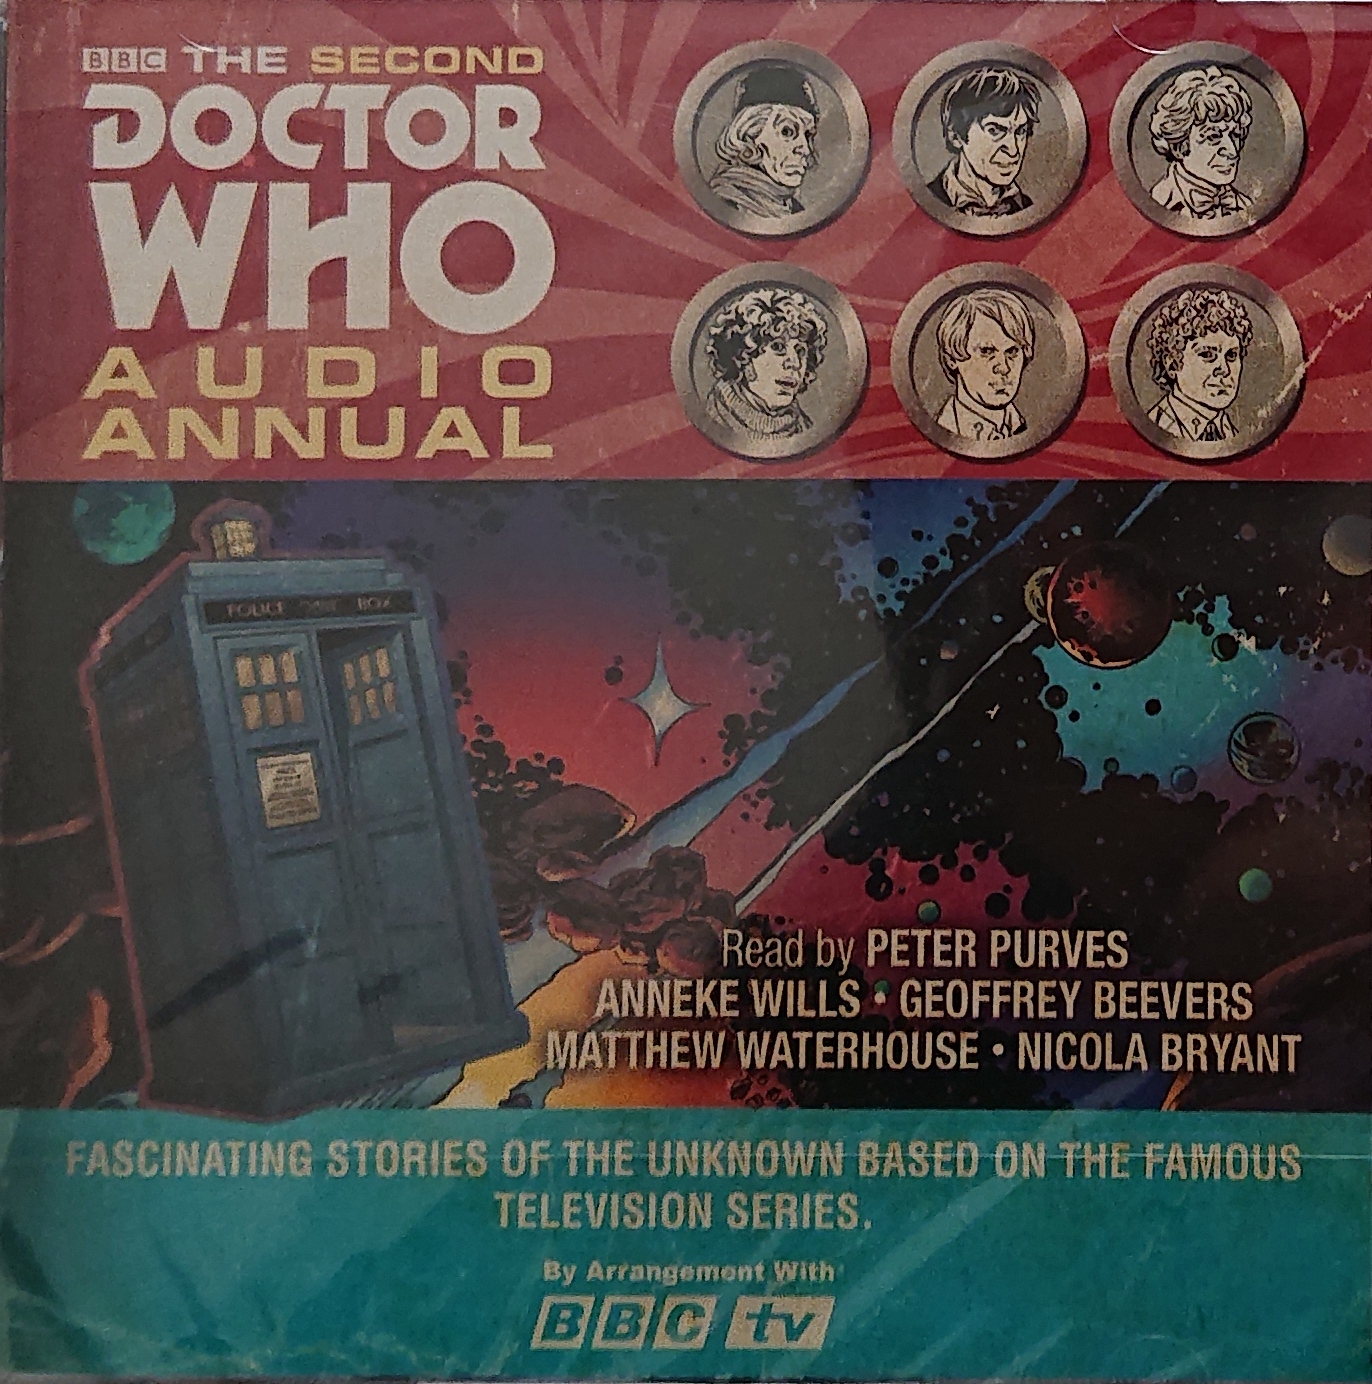 Picture of Doctor Who - Audio annual by artist Various from the BBC cds - Records and Tapes library